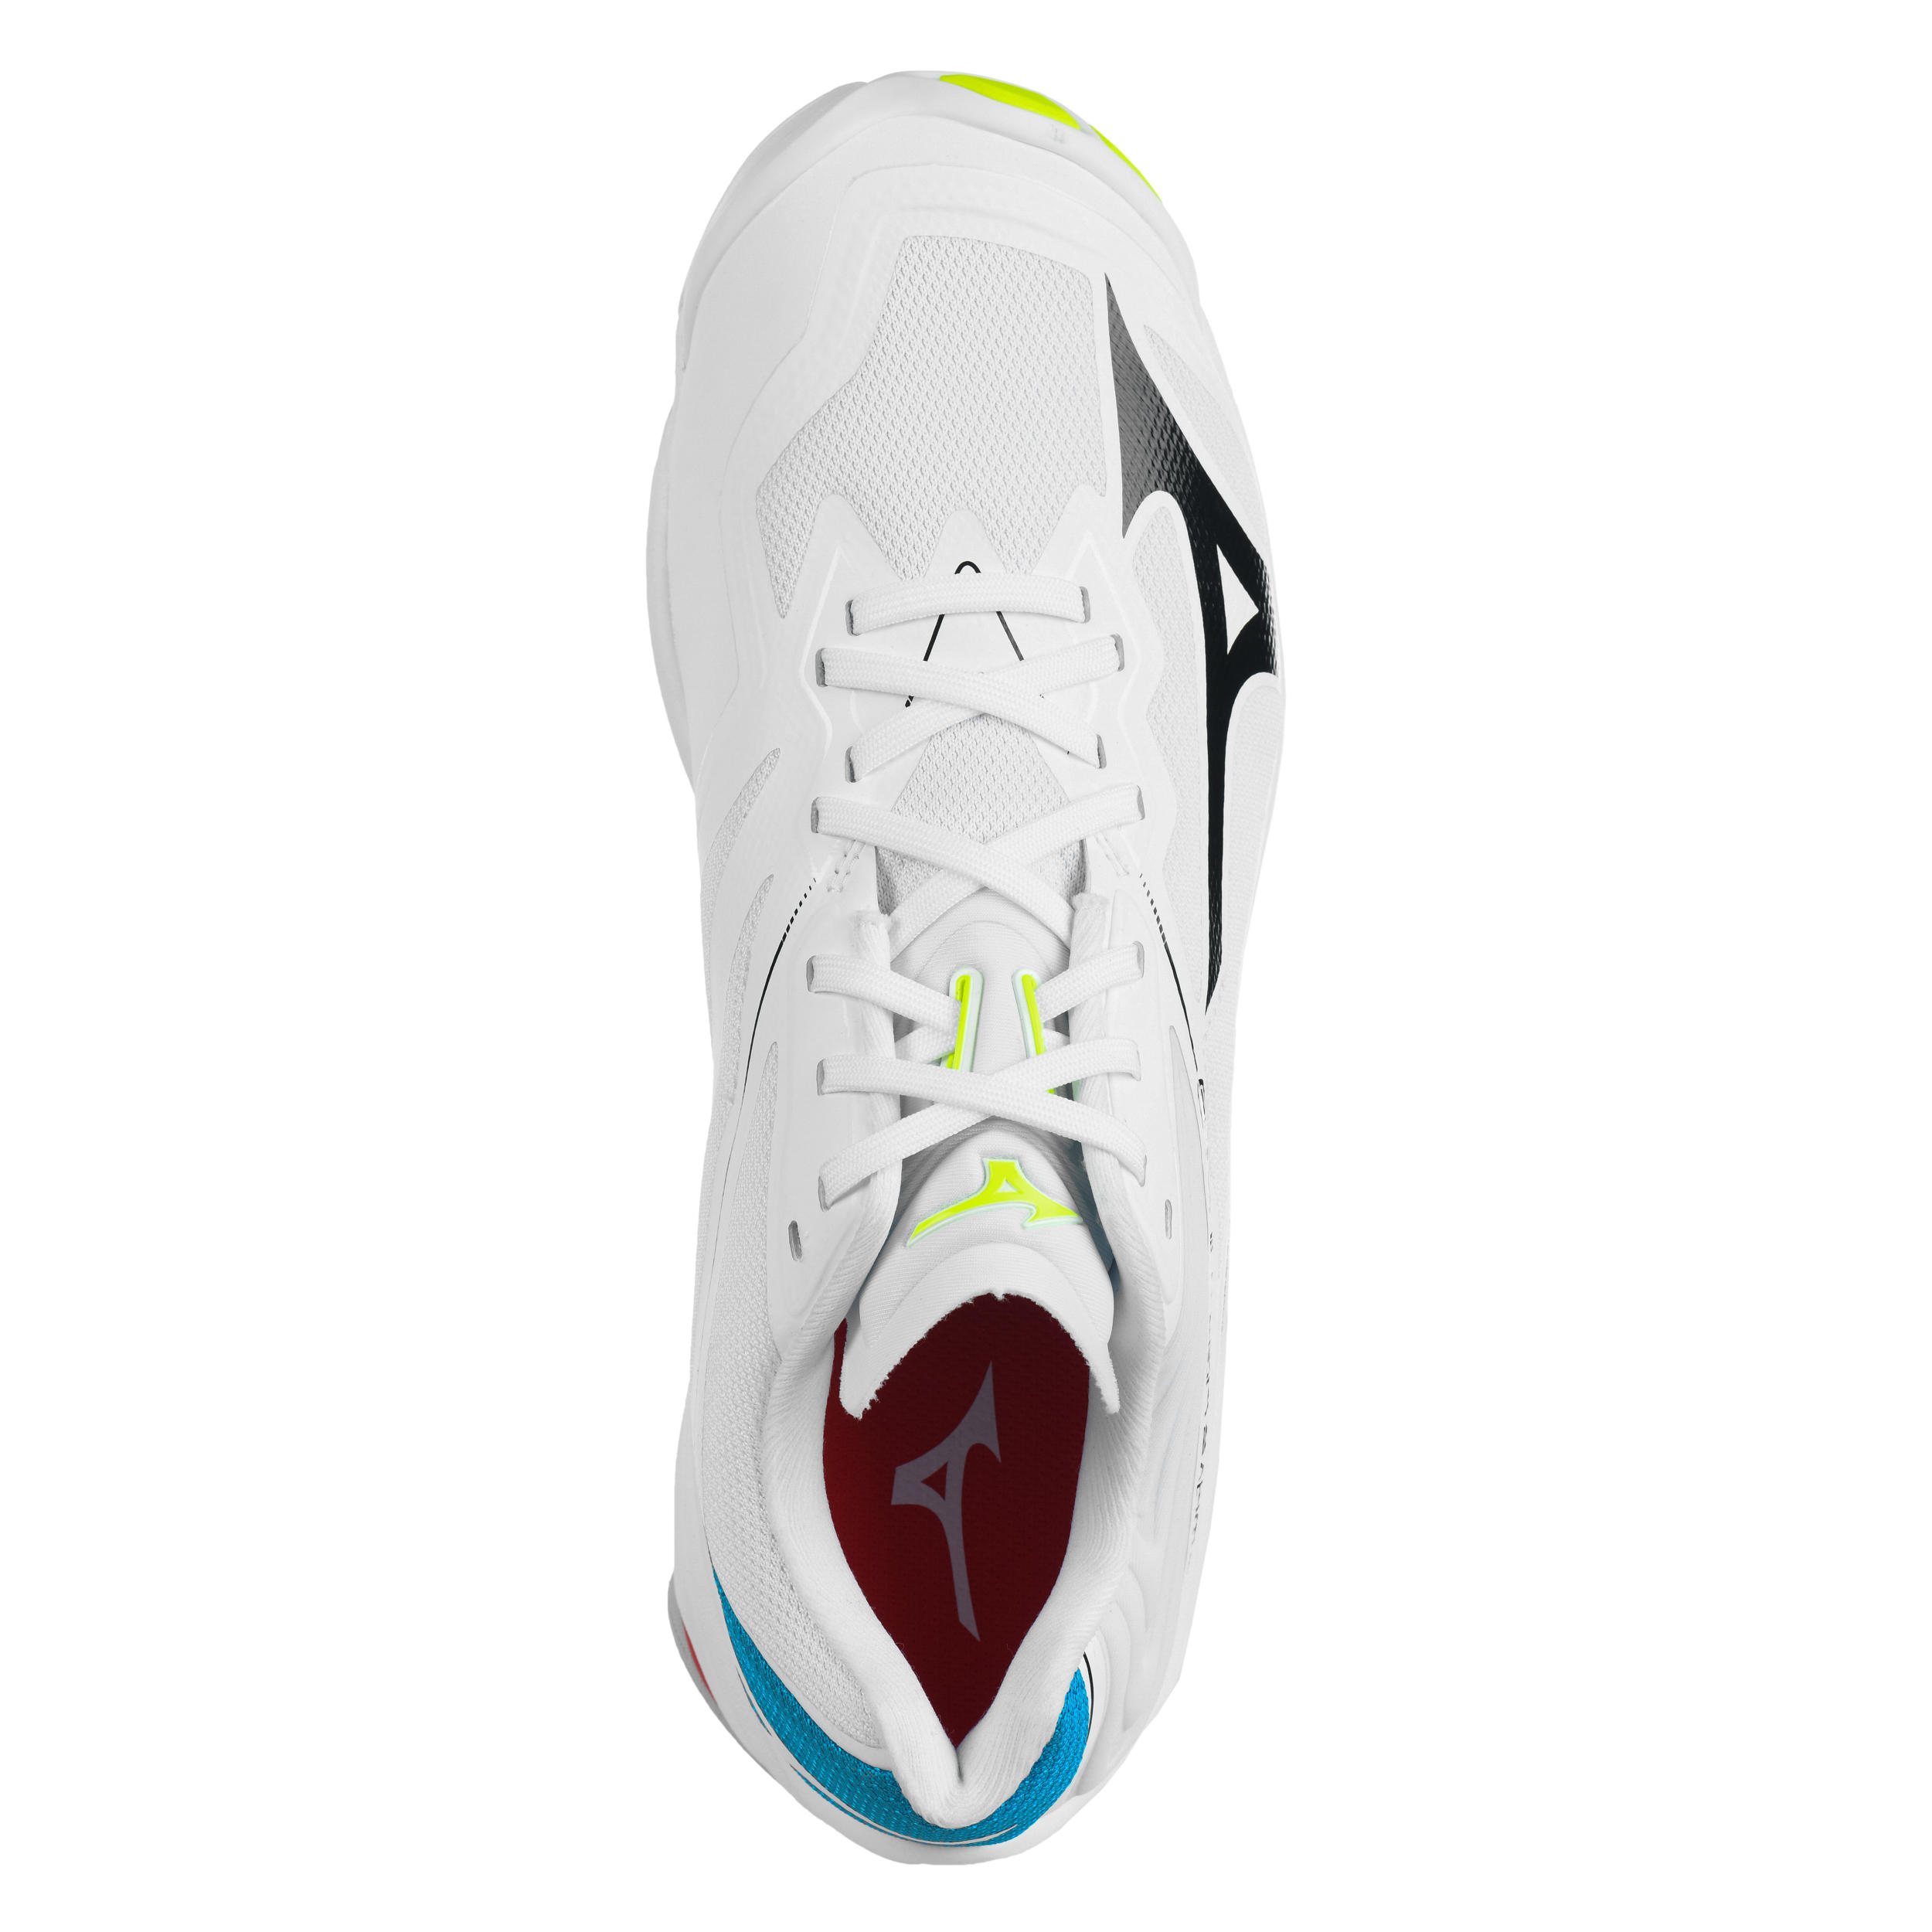 Men's Volleyball Shoes Lightning Z6 - White 7/8